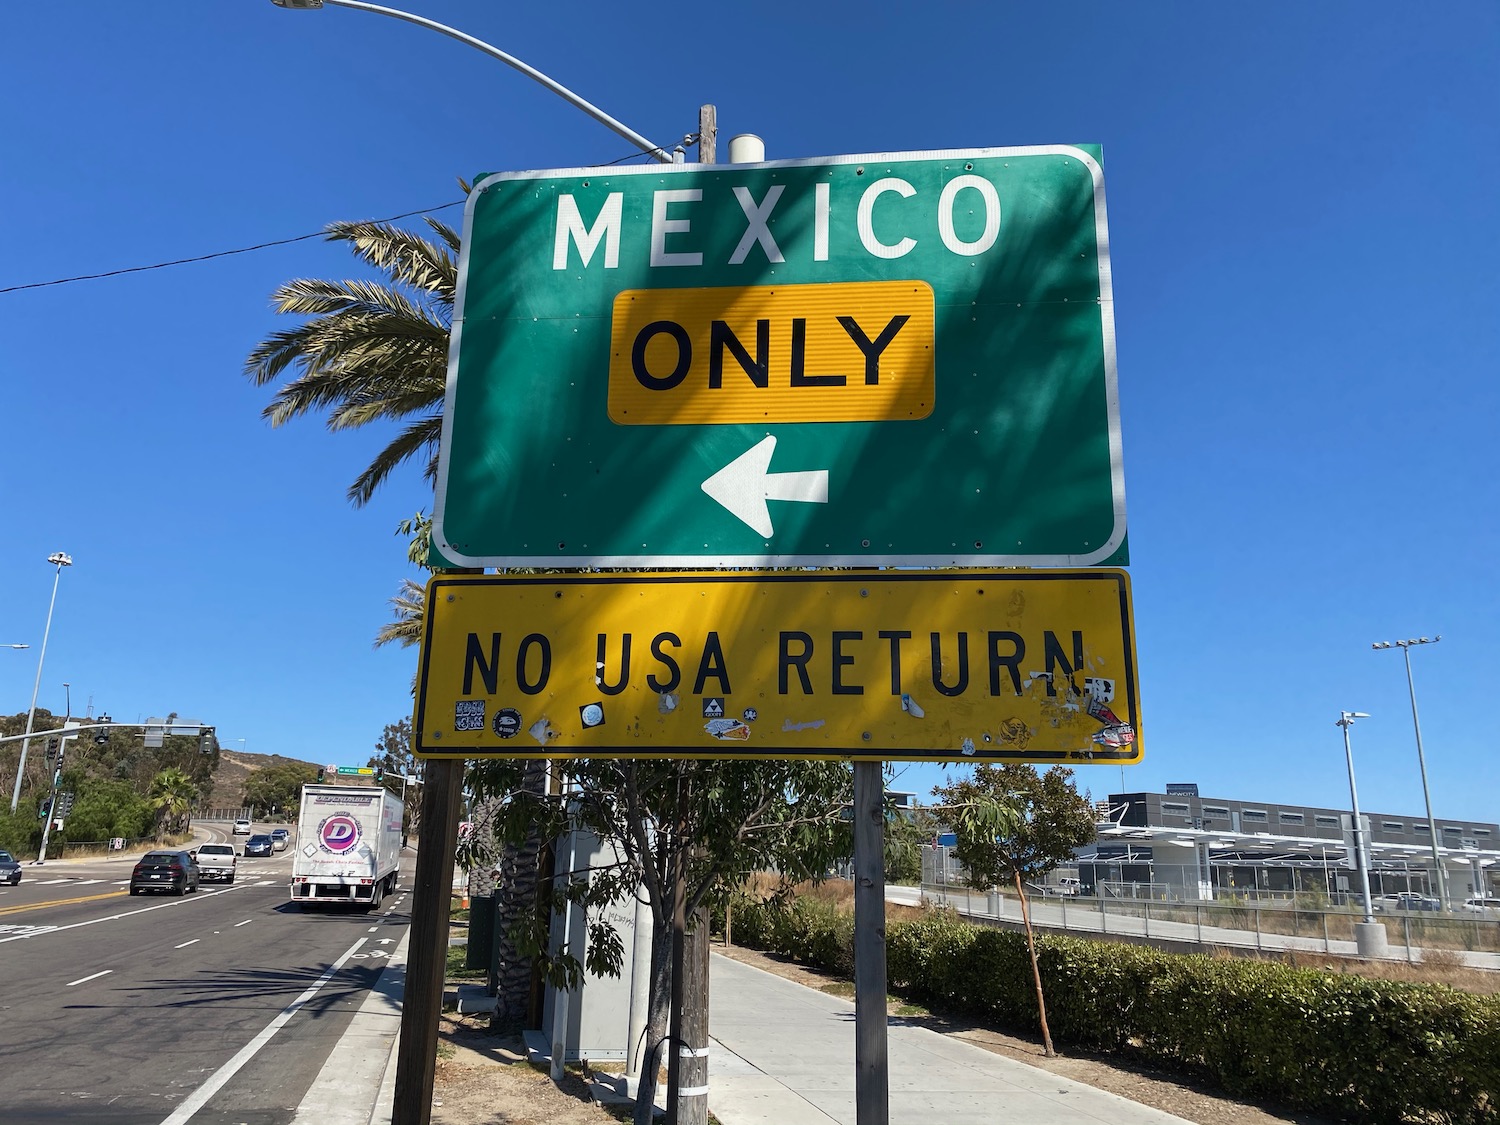 Mexicans can Use US Border Crossing Card to enter the US. 